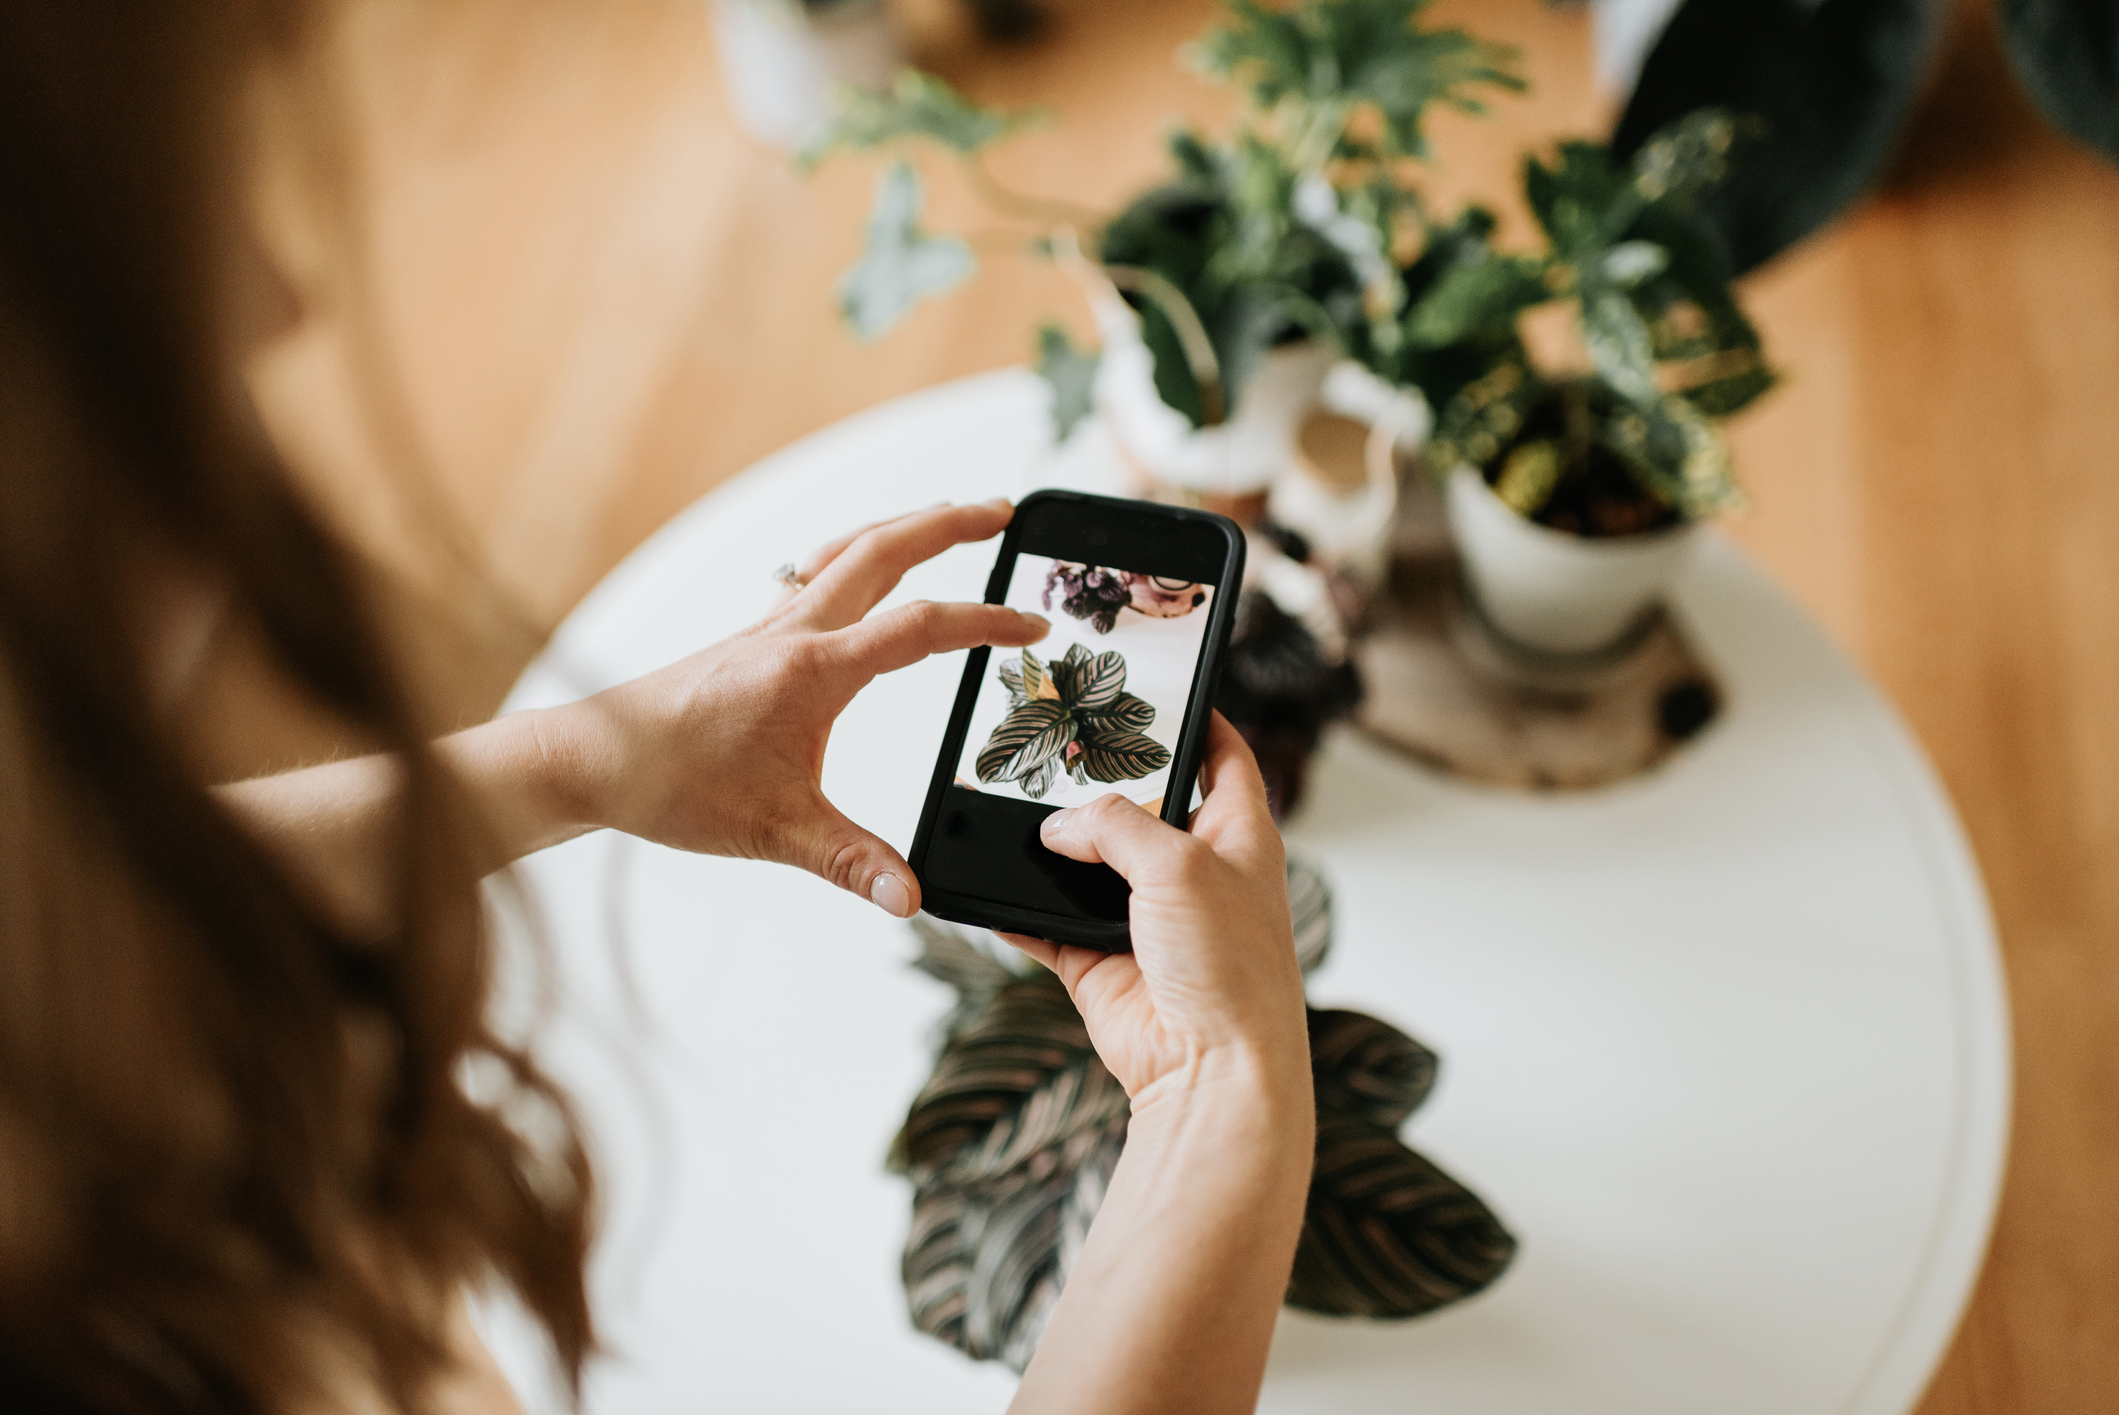 Woman holding phone taking photo of house plant